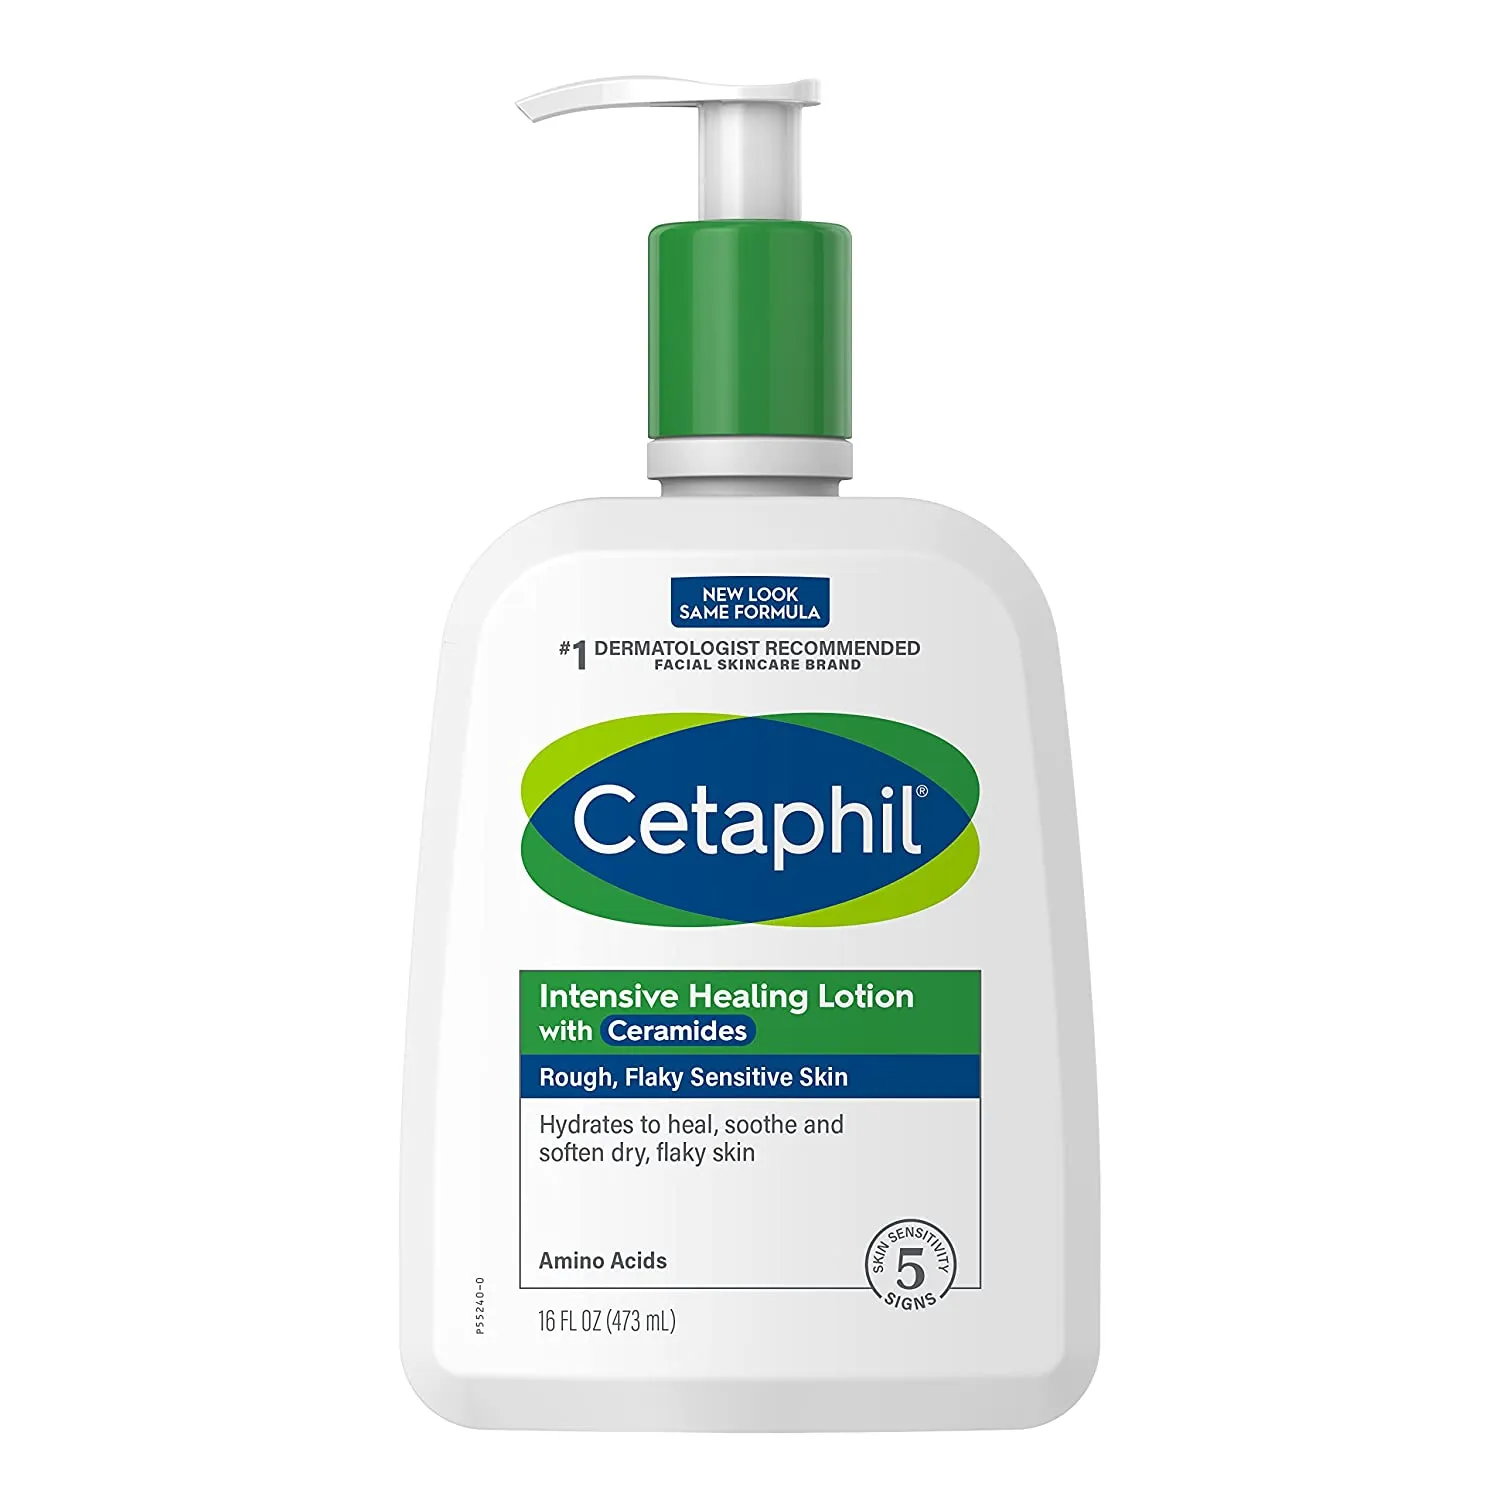 FEMMENORDIC's choice in the Lubriderm vs Cetaphil comparison, the Intensive Healing Lotion by Cetaphil